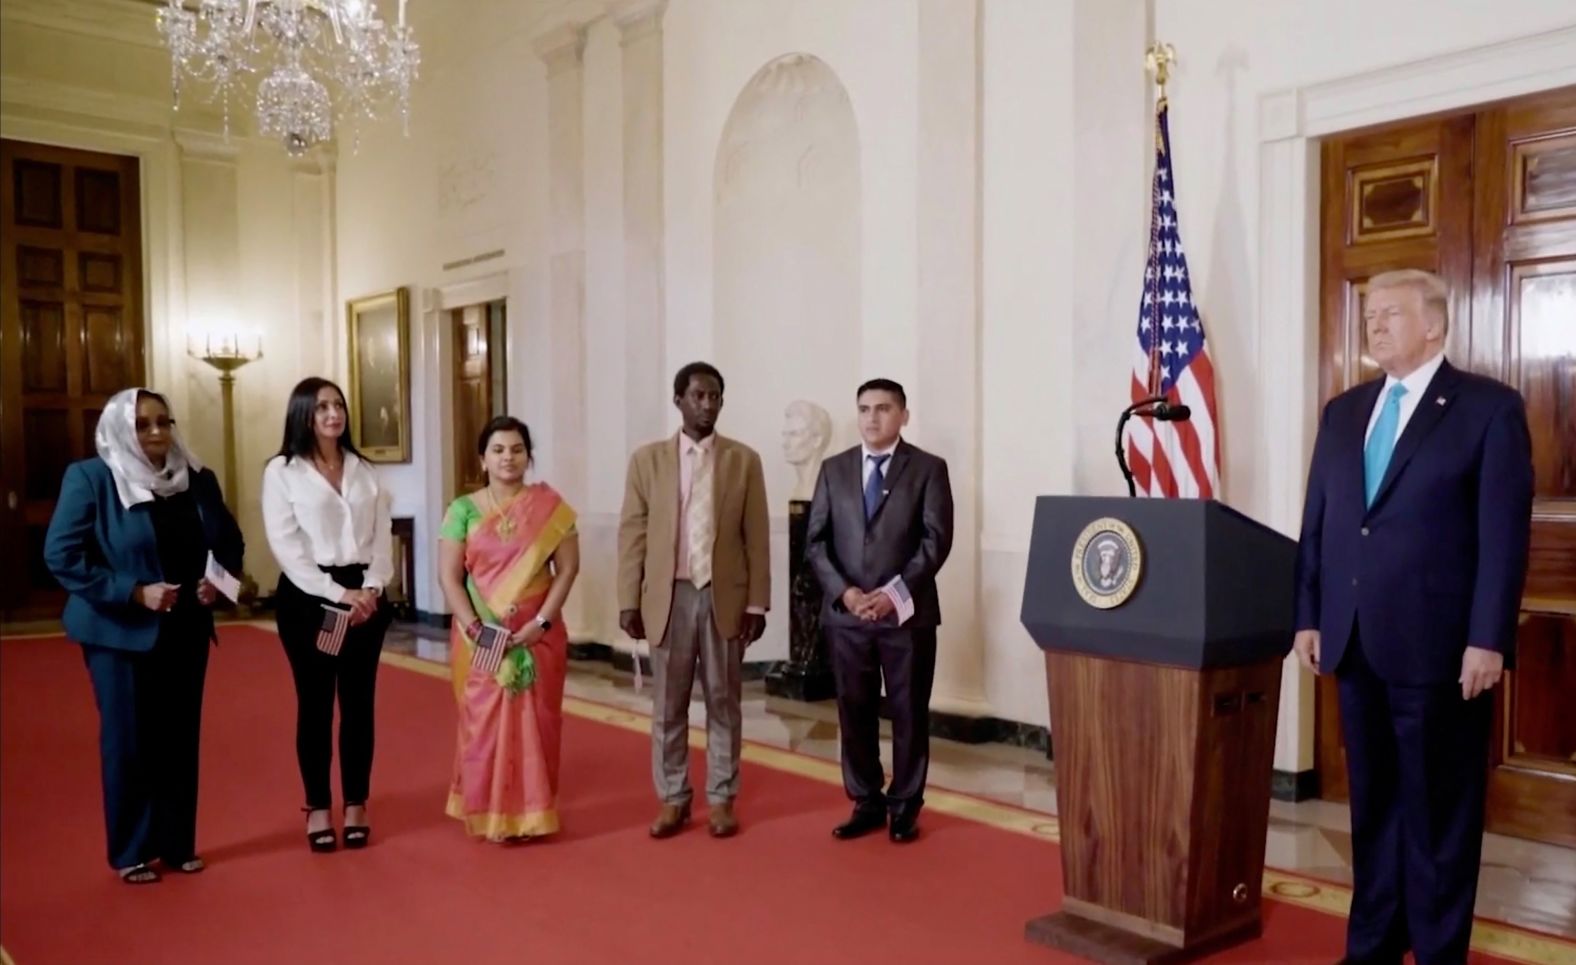 Trump oversees a naturalization ceremony for five new US citizens at the White House. "You followed the rules, you obeyed the laws, you learned your history, embraced our values and proved yourselves to be men and women of the highest integrity," the President said at <a href="index.php?page=&url=https%3A%2F%2Fwww.cnn.com%2Fpolitics%2Flive-news%2Frnc-2020-day-2%2Fh_0246810184cdb78a886aa2635099d041" target="_blank">the ceremony,</a> which occurred earlier in the day on Tuesday. "It's not so easy. You went through a lot, and we appreciate you being here with us today."